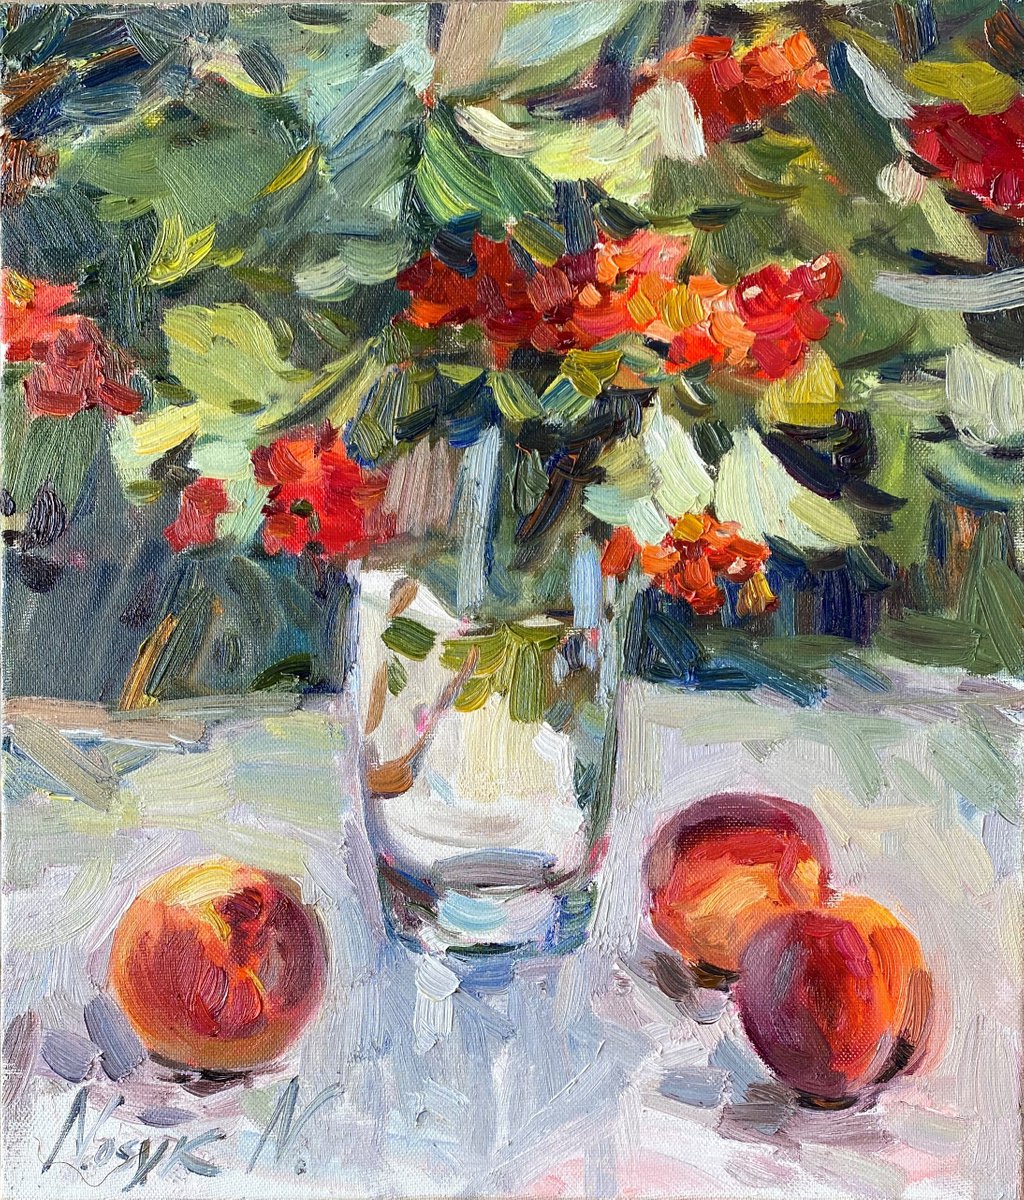 Peaches and a bouquete | original oil painting by Nataliia Nosyk